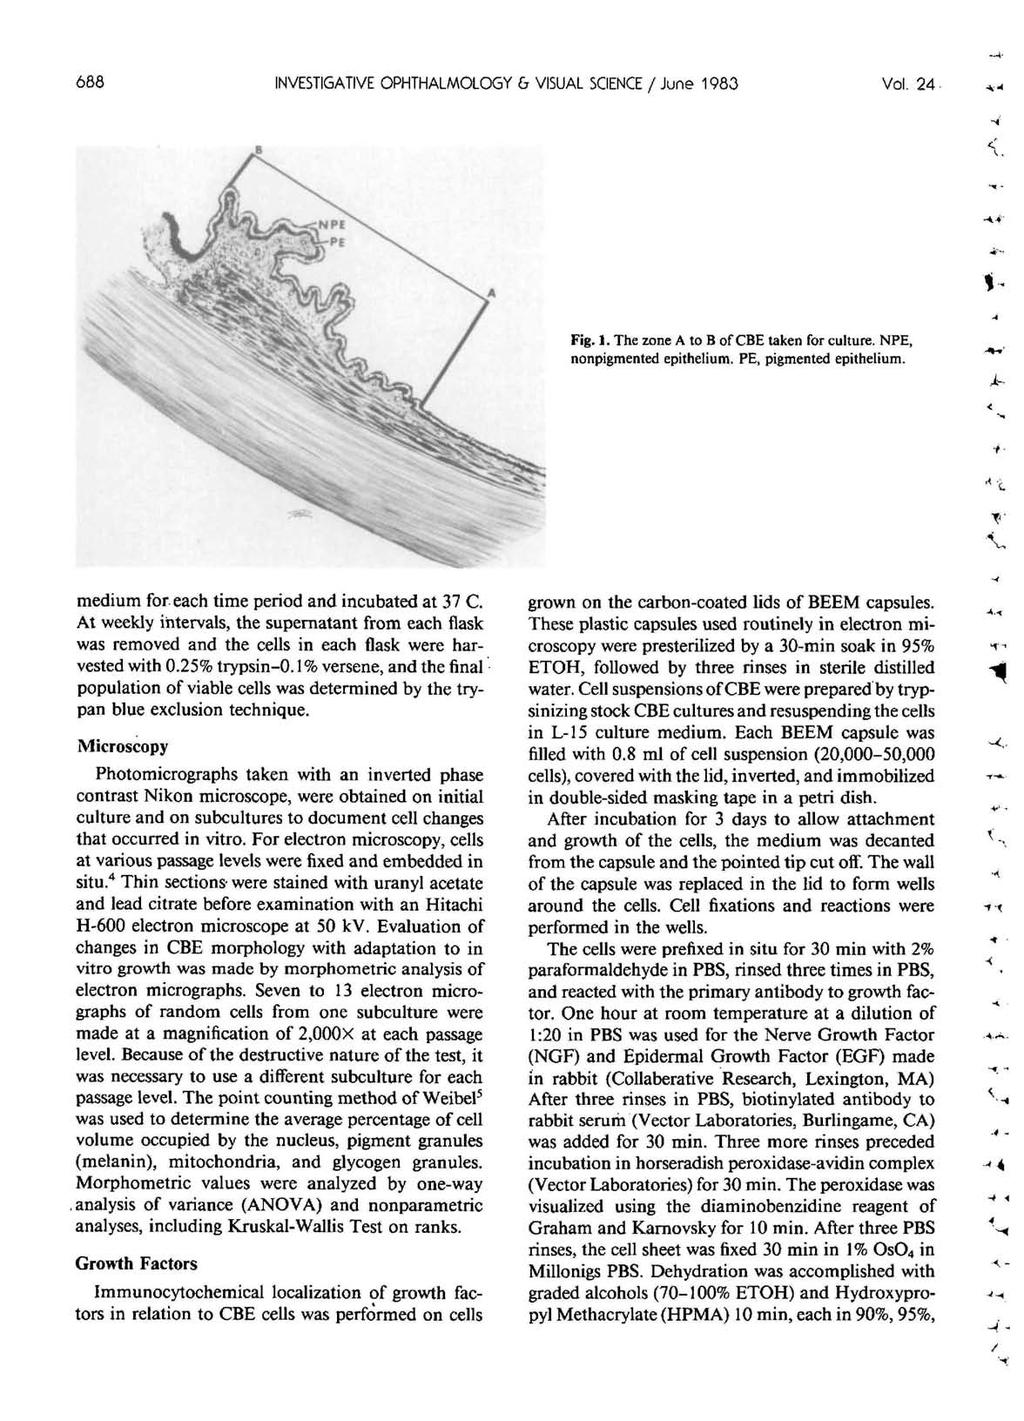 688 INVESTIGATIVE OPHTHALMOLOGY 6 VISUAL SCIENCE / June 1983 Vol. 24 Fig. 1. The zone A to B of CBE taken for culture. NPE, nonpigmented epithelium. PE, pigmented epithelium.